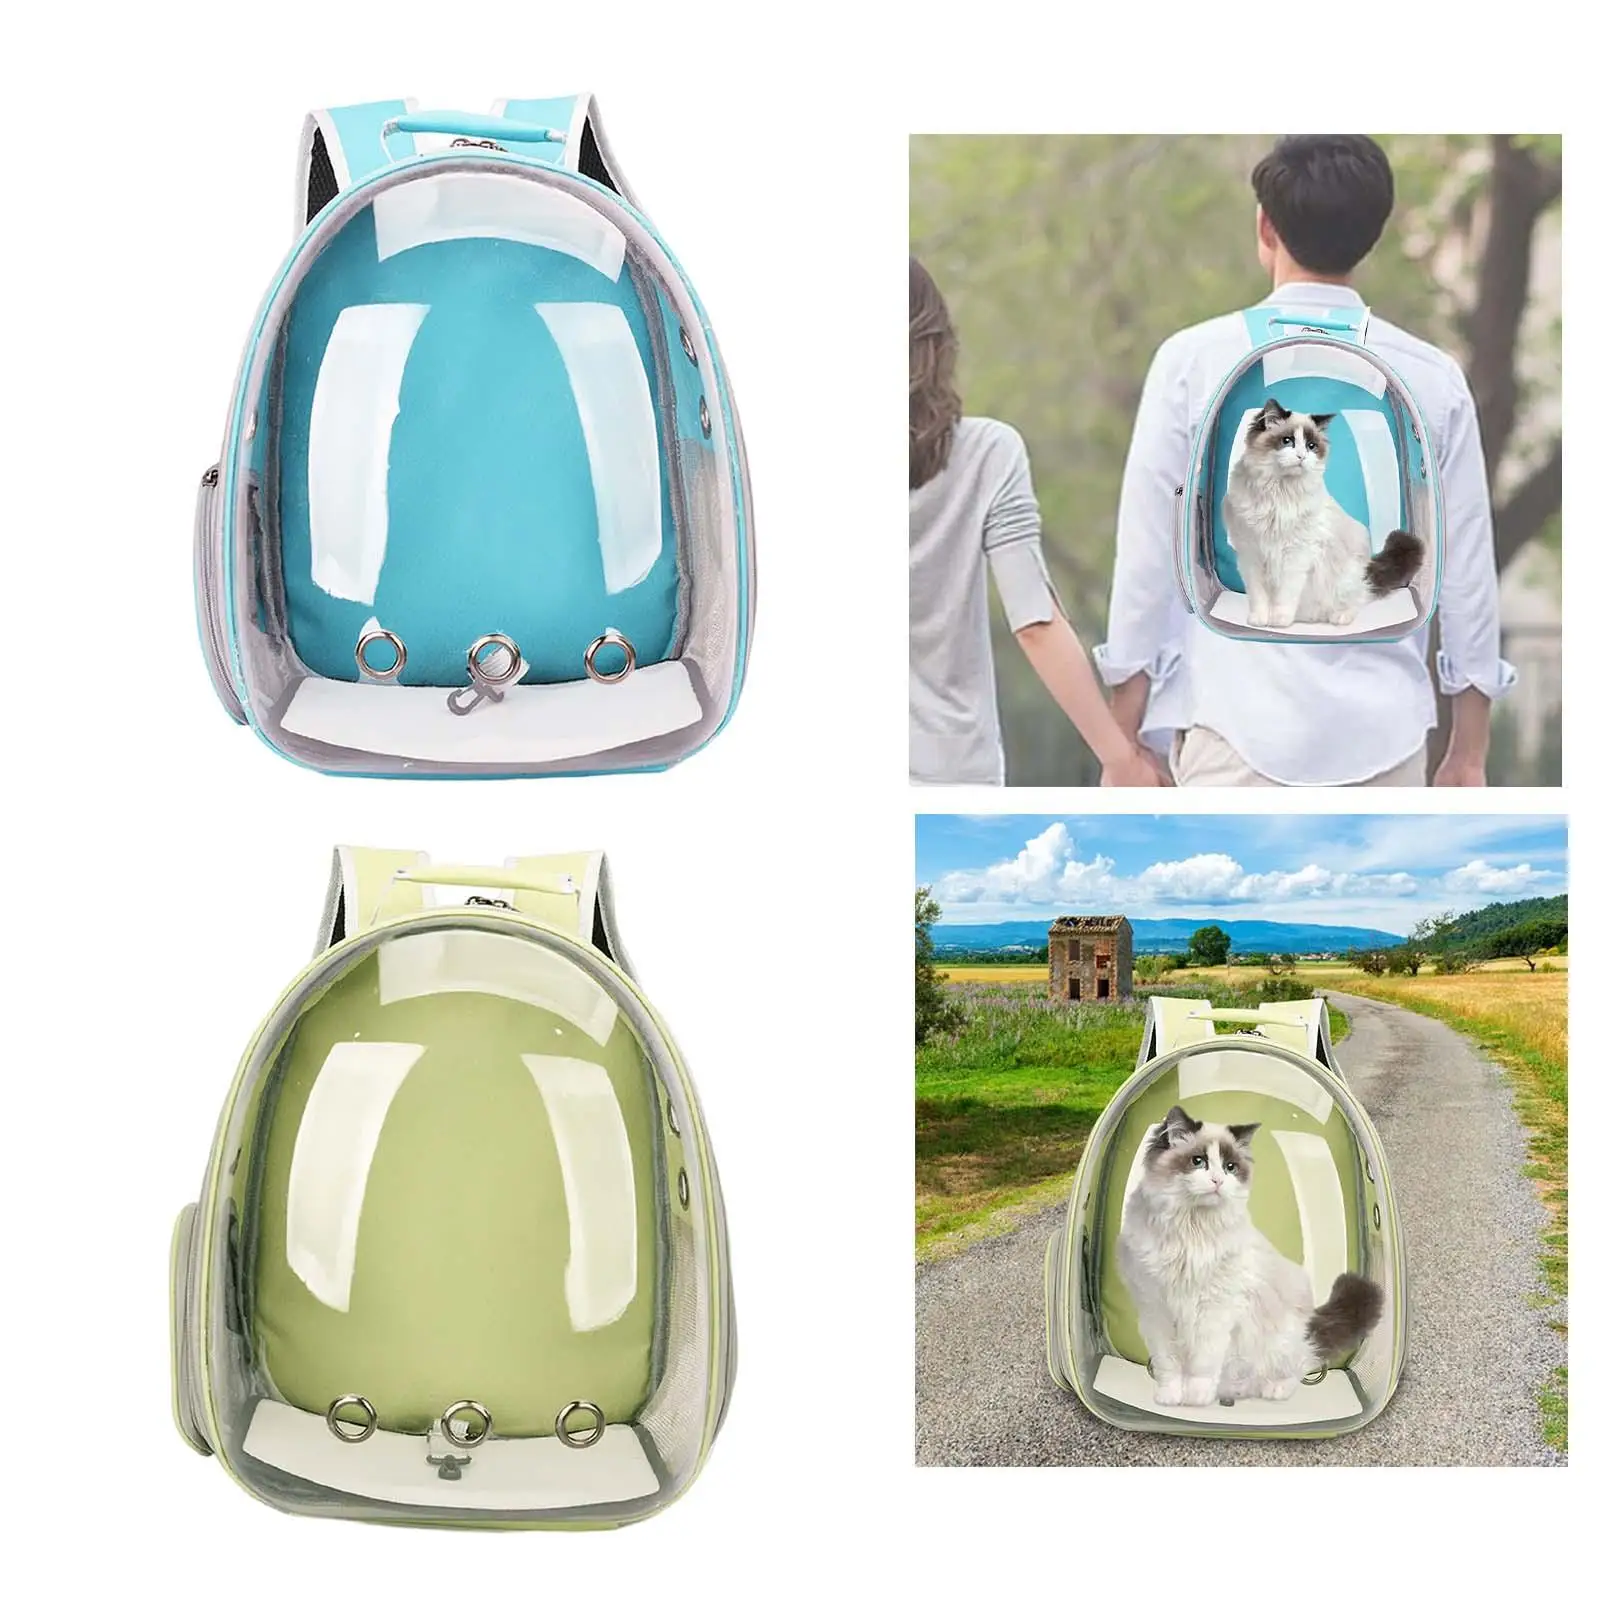 Cat Carrier Backpack Portable Comfortable Small Dogs Cats Travel Carrier Small Dog Hiking Backpack for Camping Traveling Outdoor